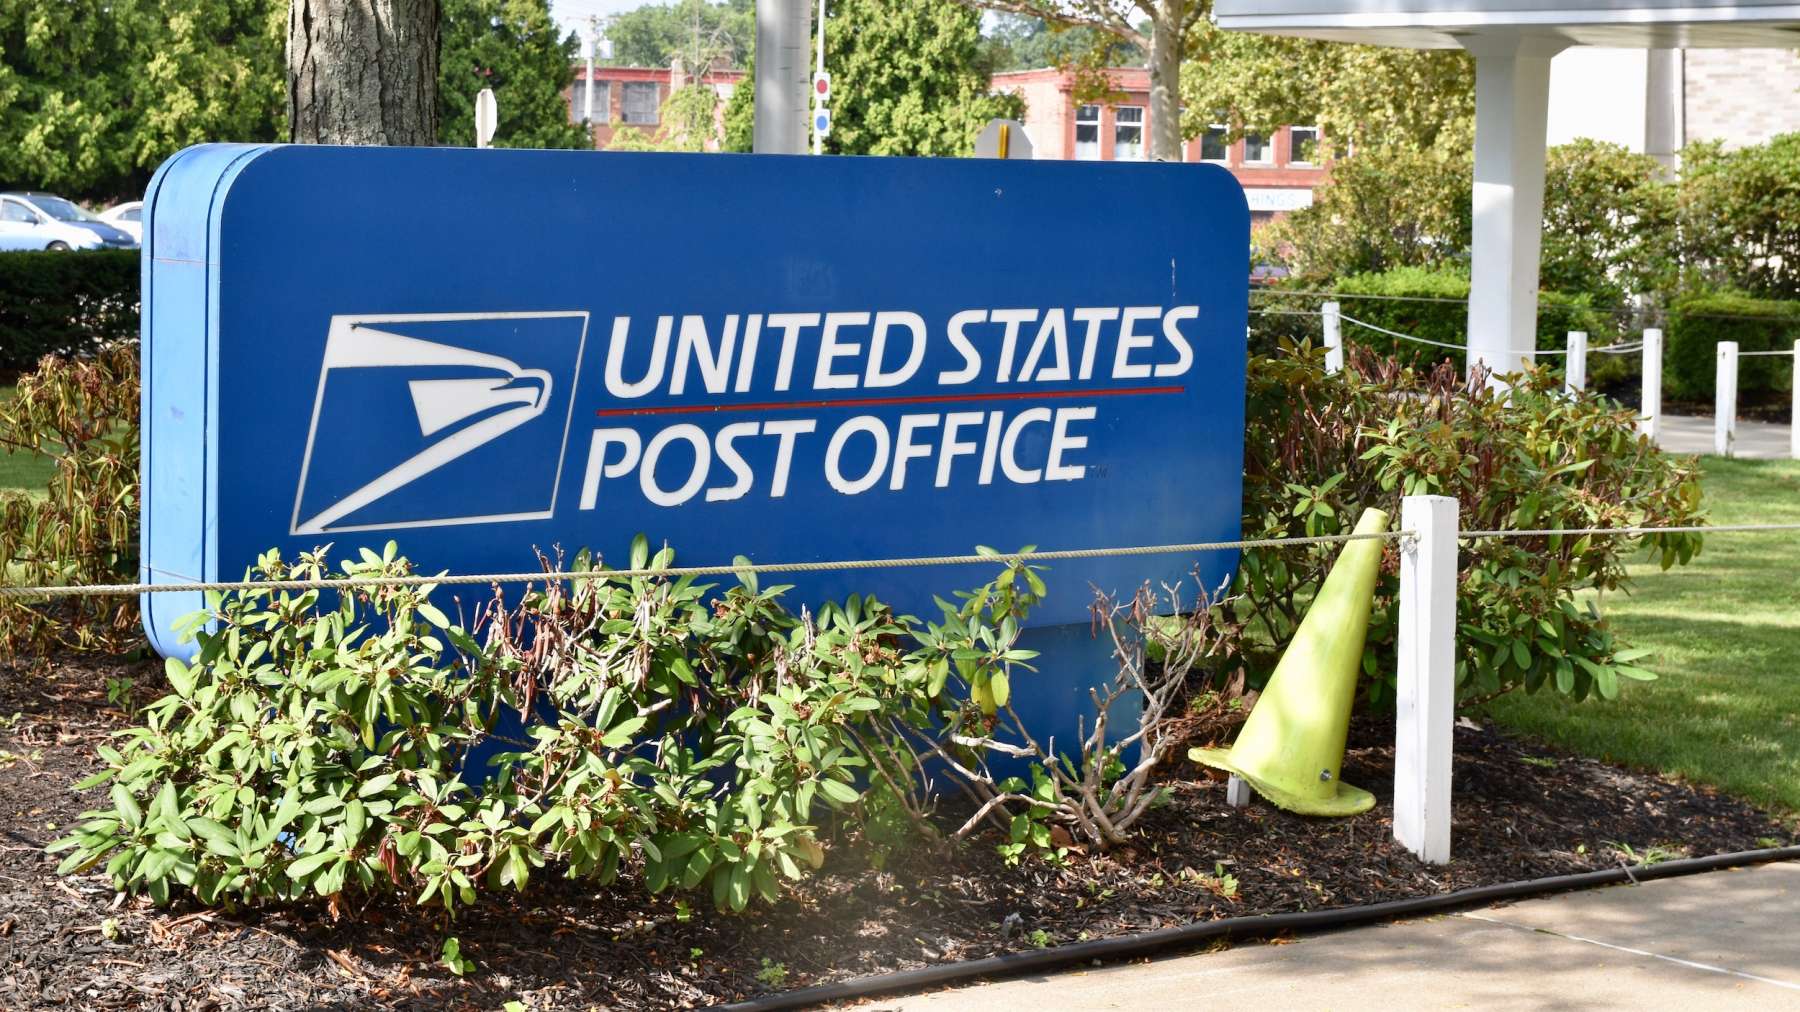 Rhode Island News: At the Post Office Day of Action in Providence